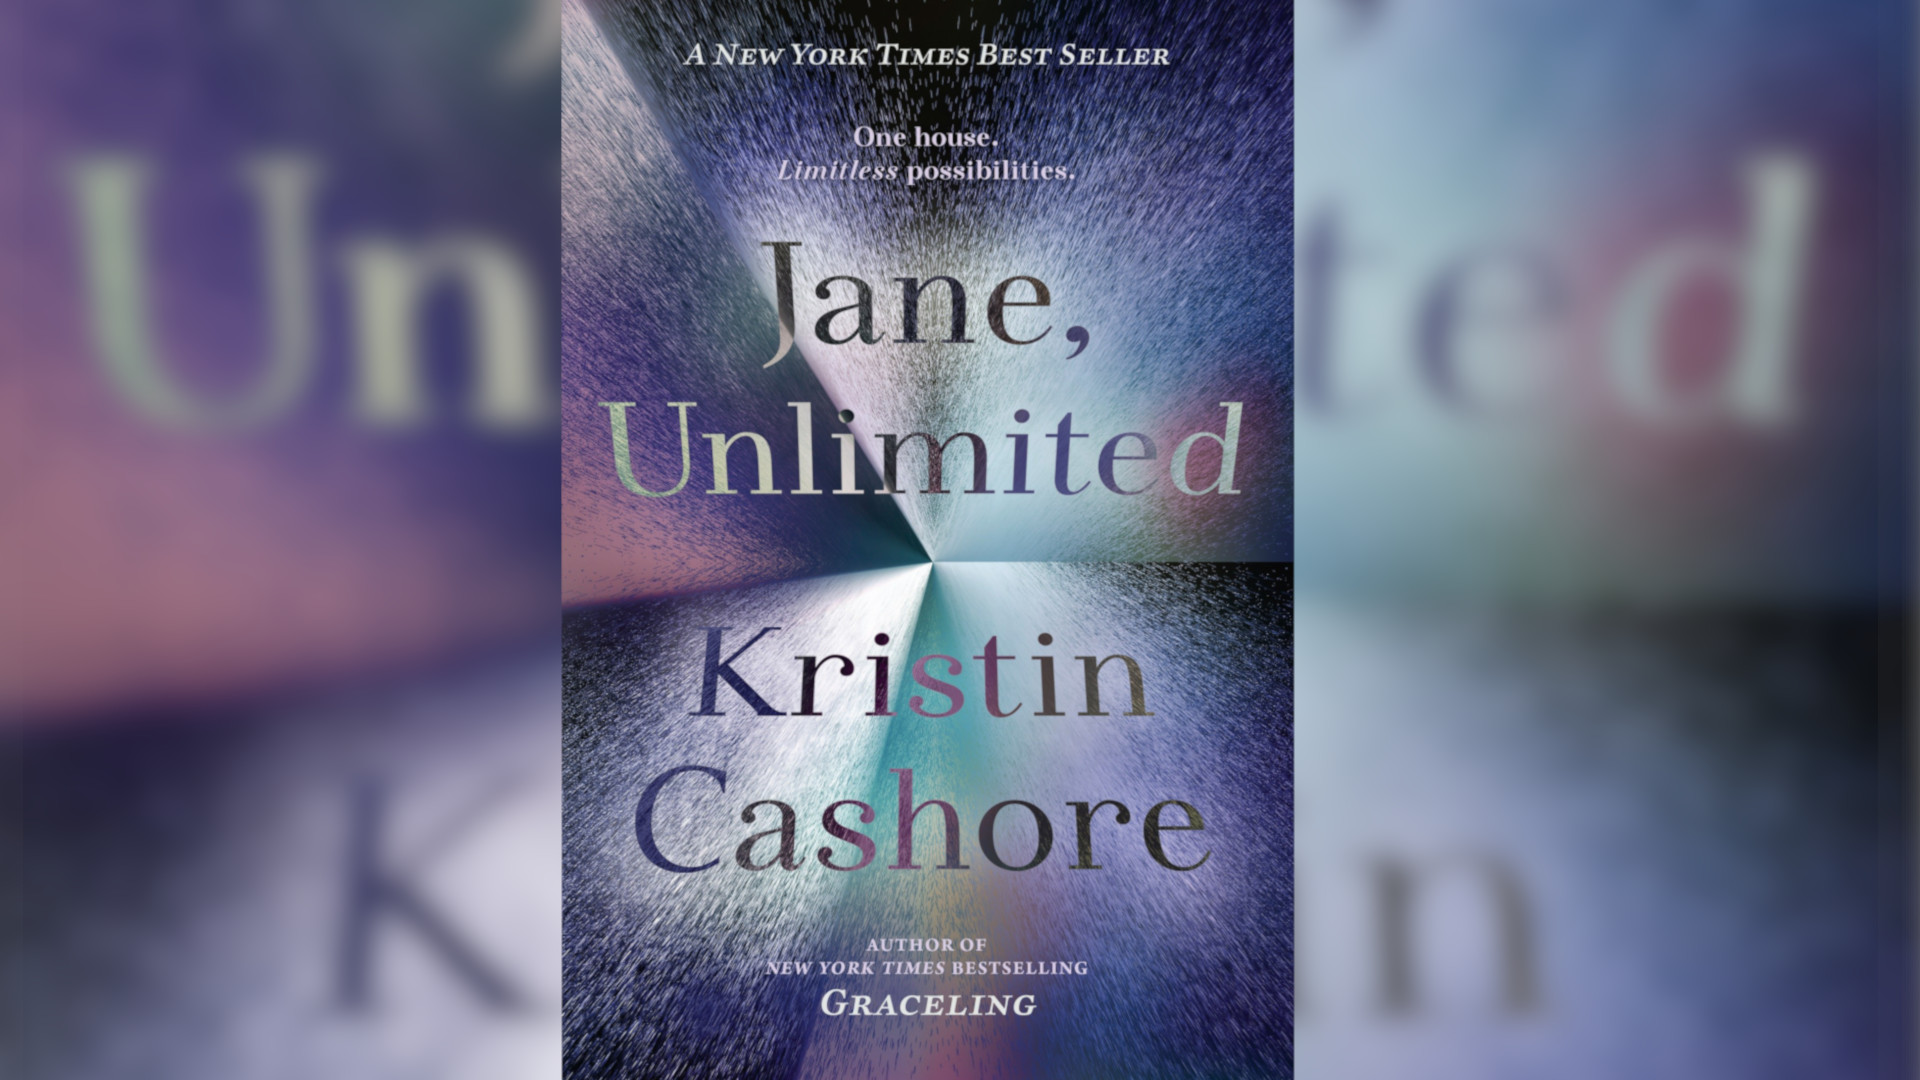 Jane, Unlimited: a pansexual heroine who contains multitudes